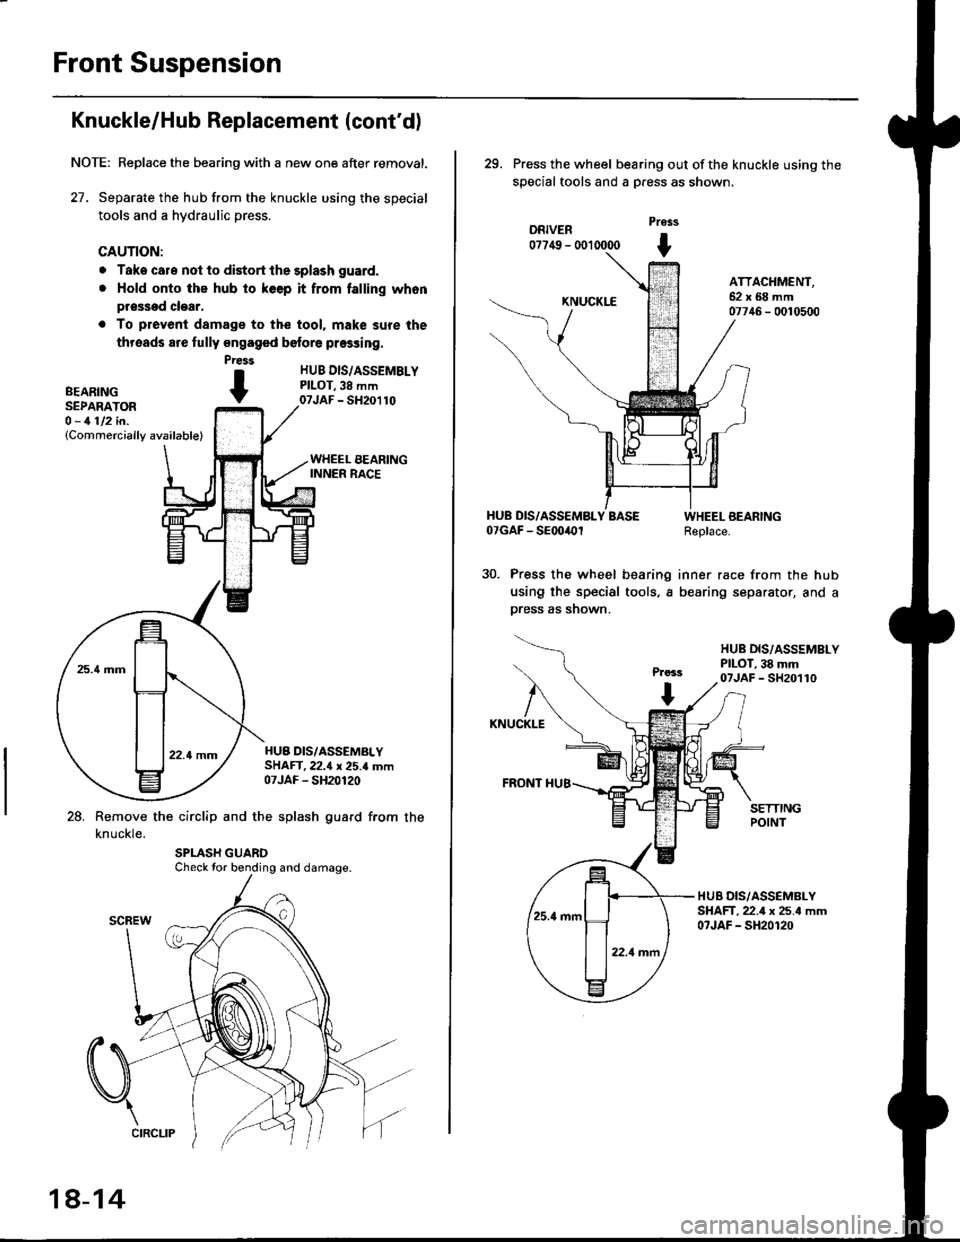 HONDA CIVIC 2000 6.G Workshop Manual Front Suspension
Knuckle/Hub Replacement (contdl
NOTE: Replace the bearing with a new one after removal.
27. Separate the hub from the knuckle using the special
tools and a hydraulic press.
CAUTION:
